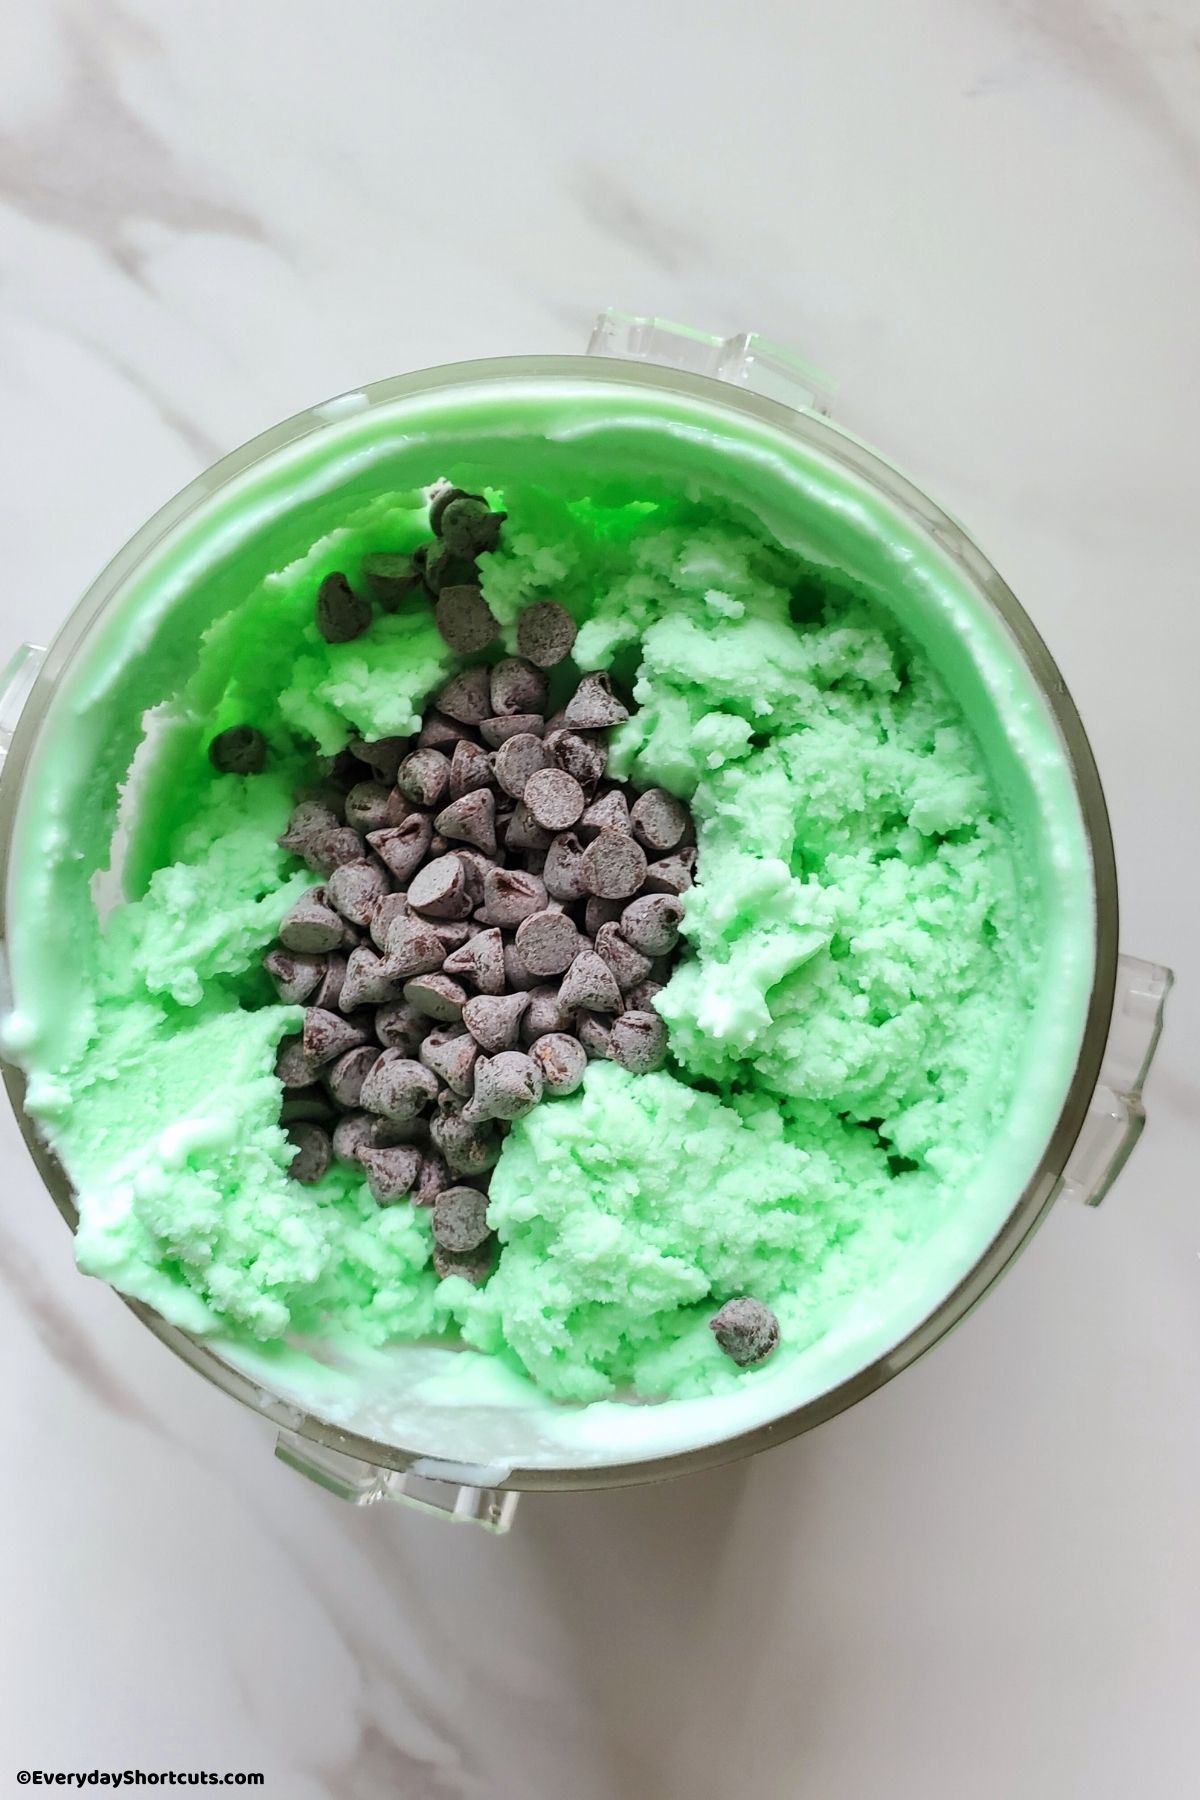 chocolate chips mixed in mint ice cream